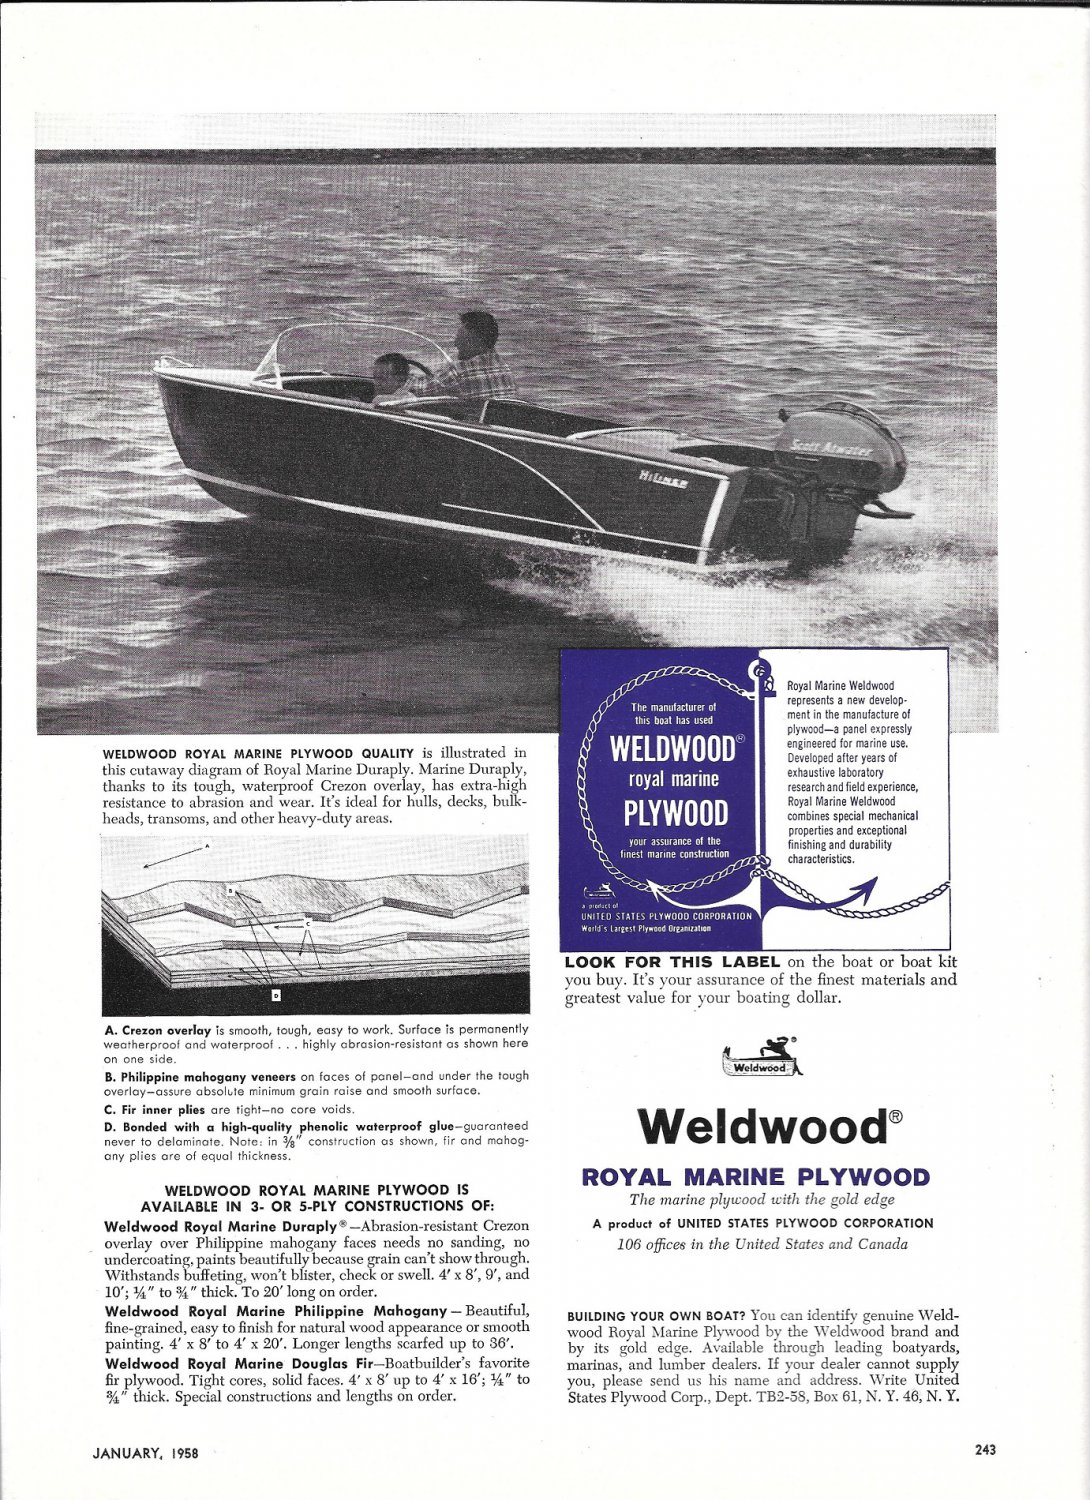 1958 HiLiner Boat Featured in Weldwood Plywood Ad- Nice Photo